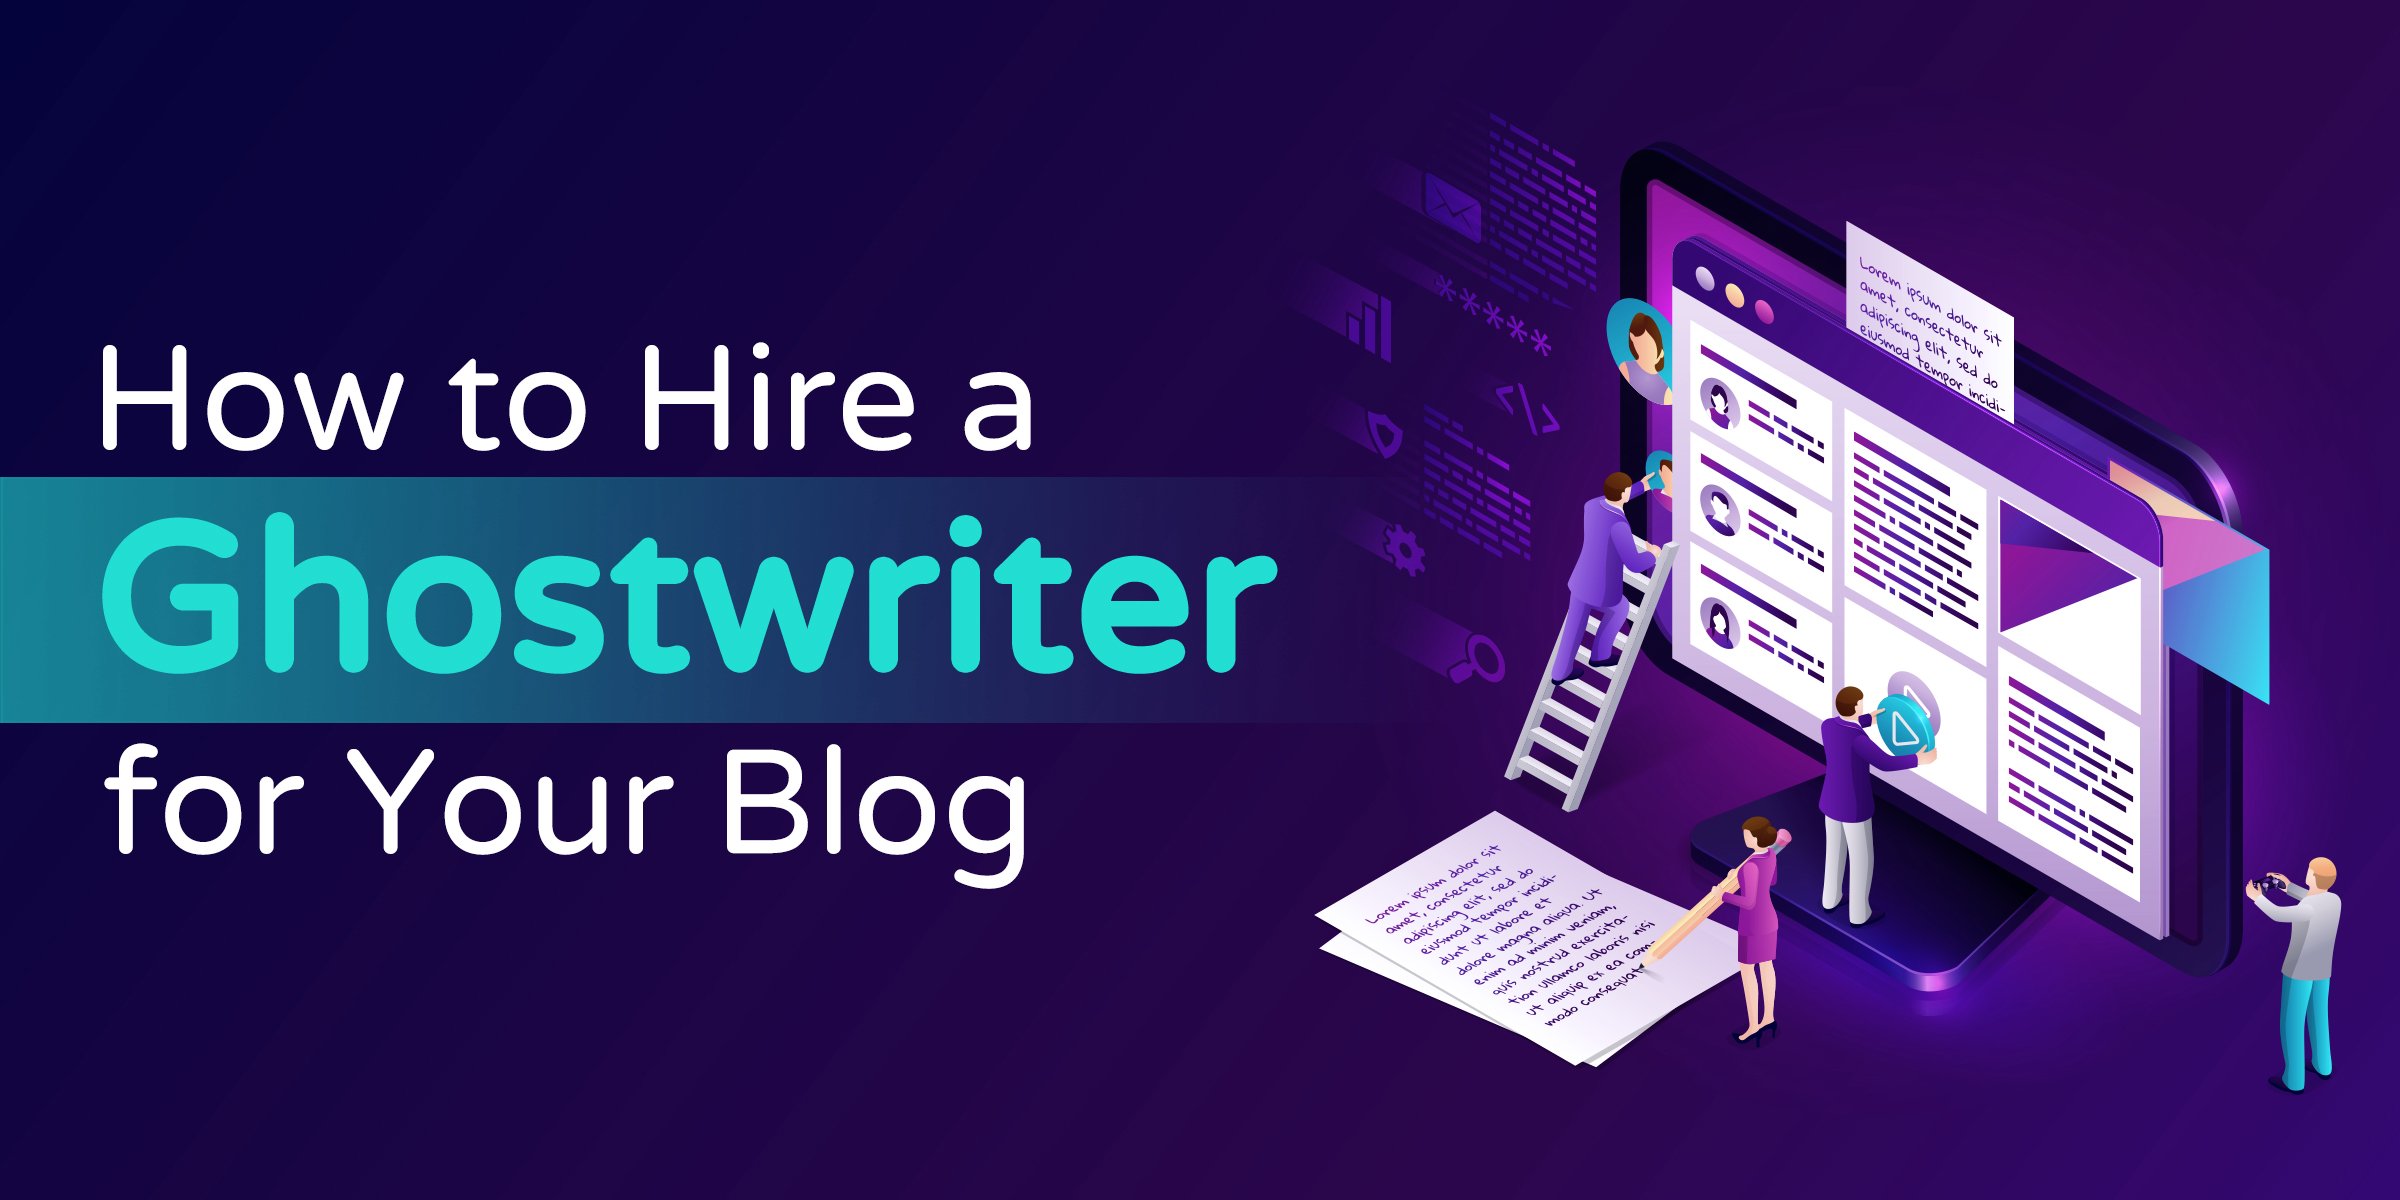 How to Hire a Ghostwriter